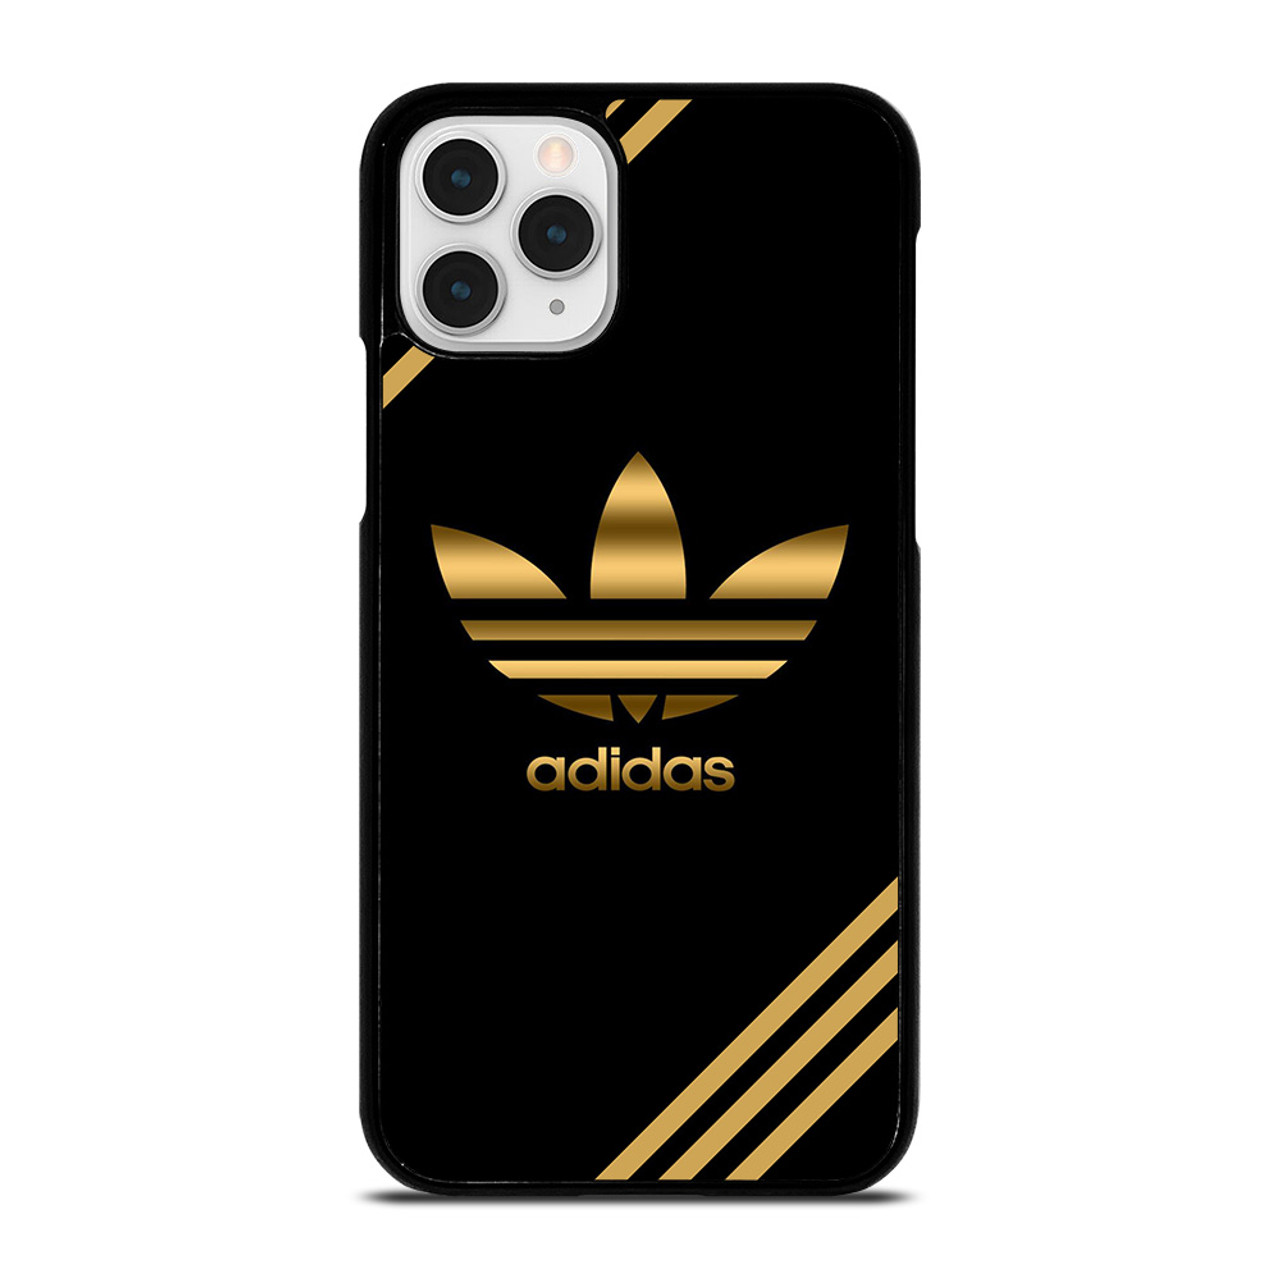 ADIDAS GOLD iPhone 11 Pro Case Cover